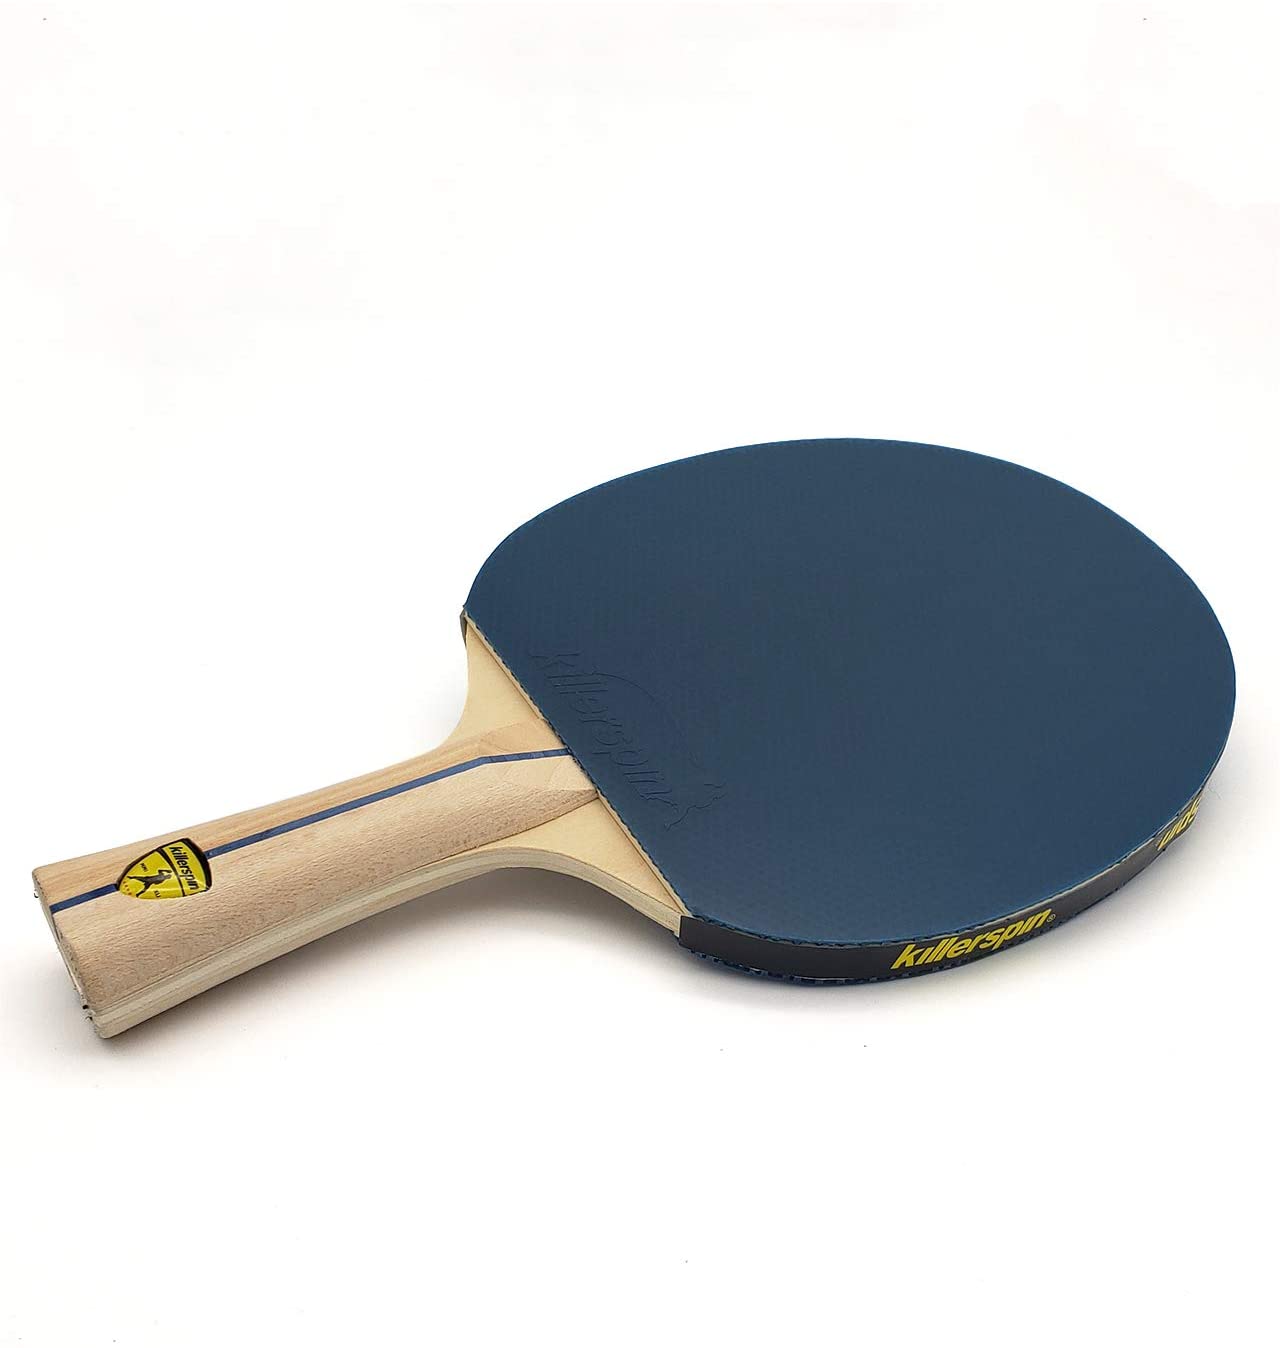 Killerspin Classic Paddle